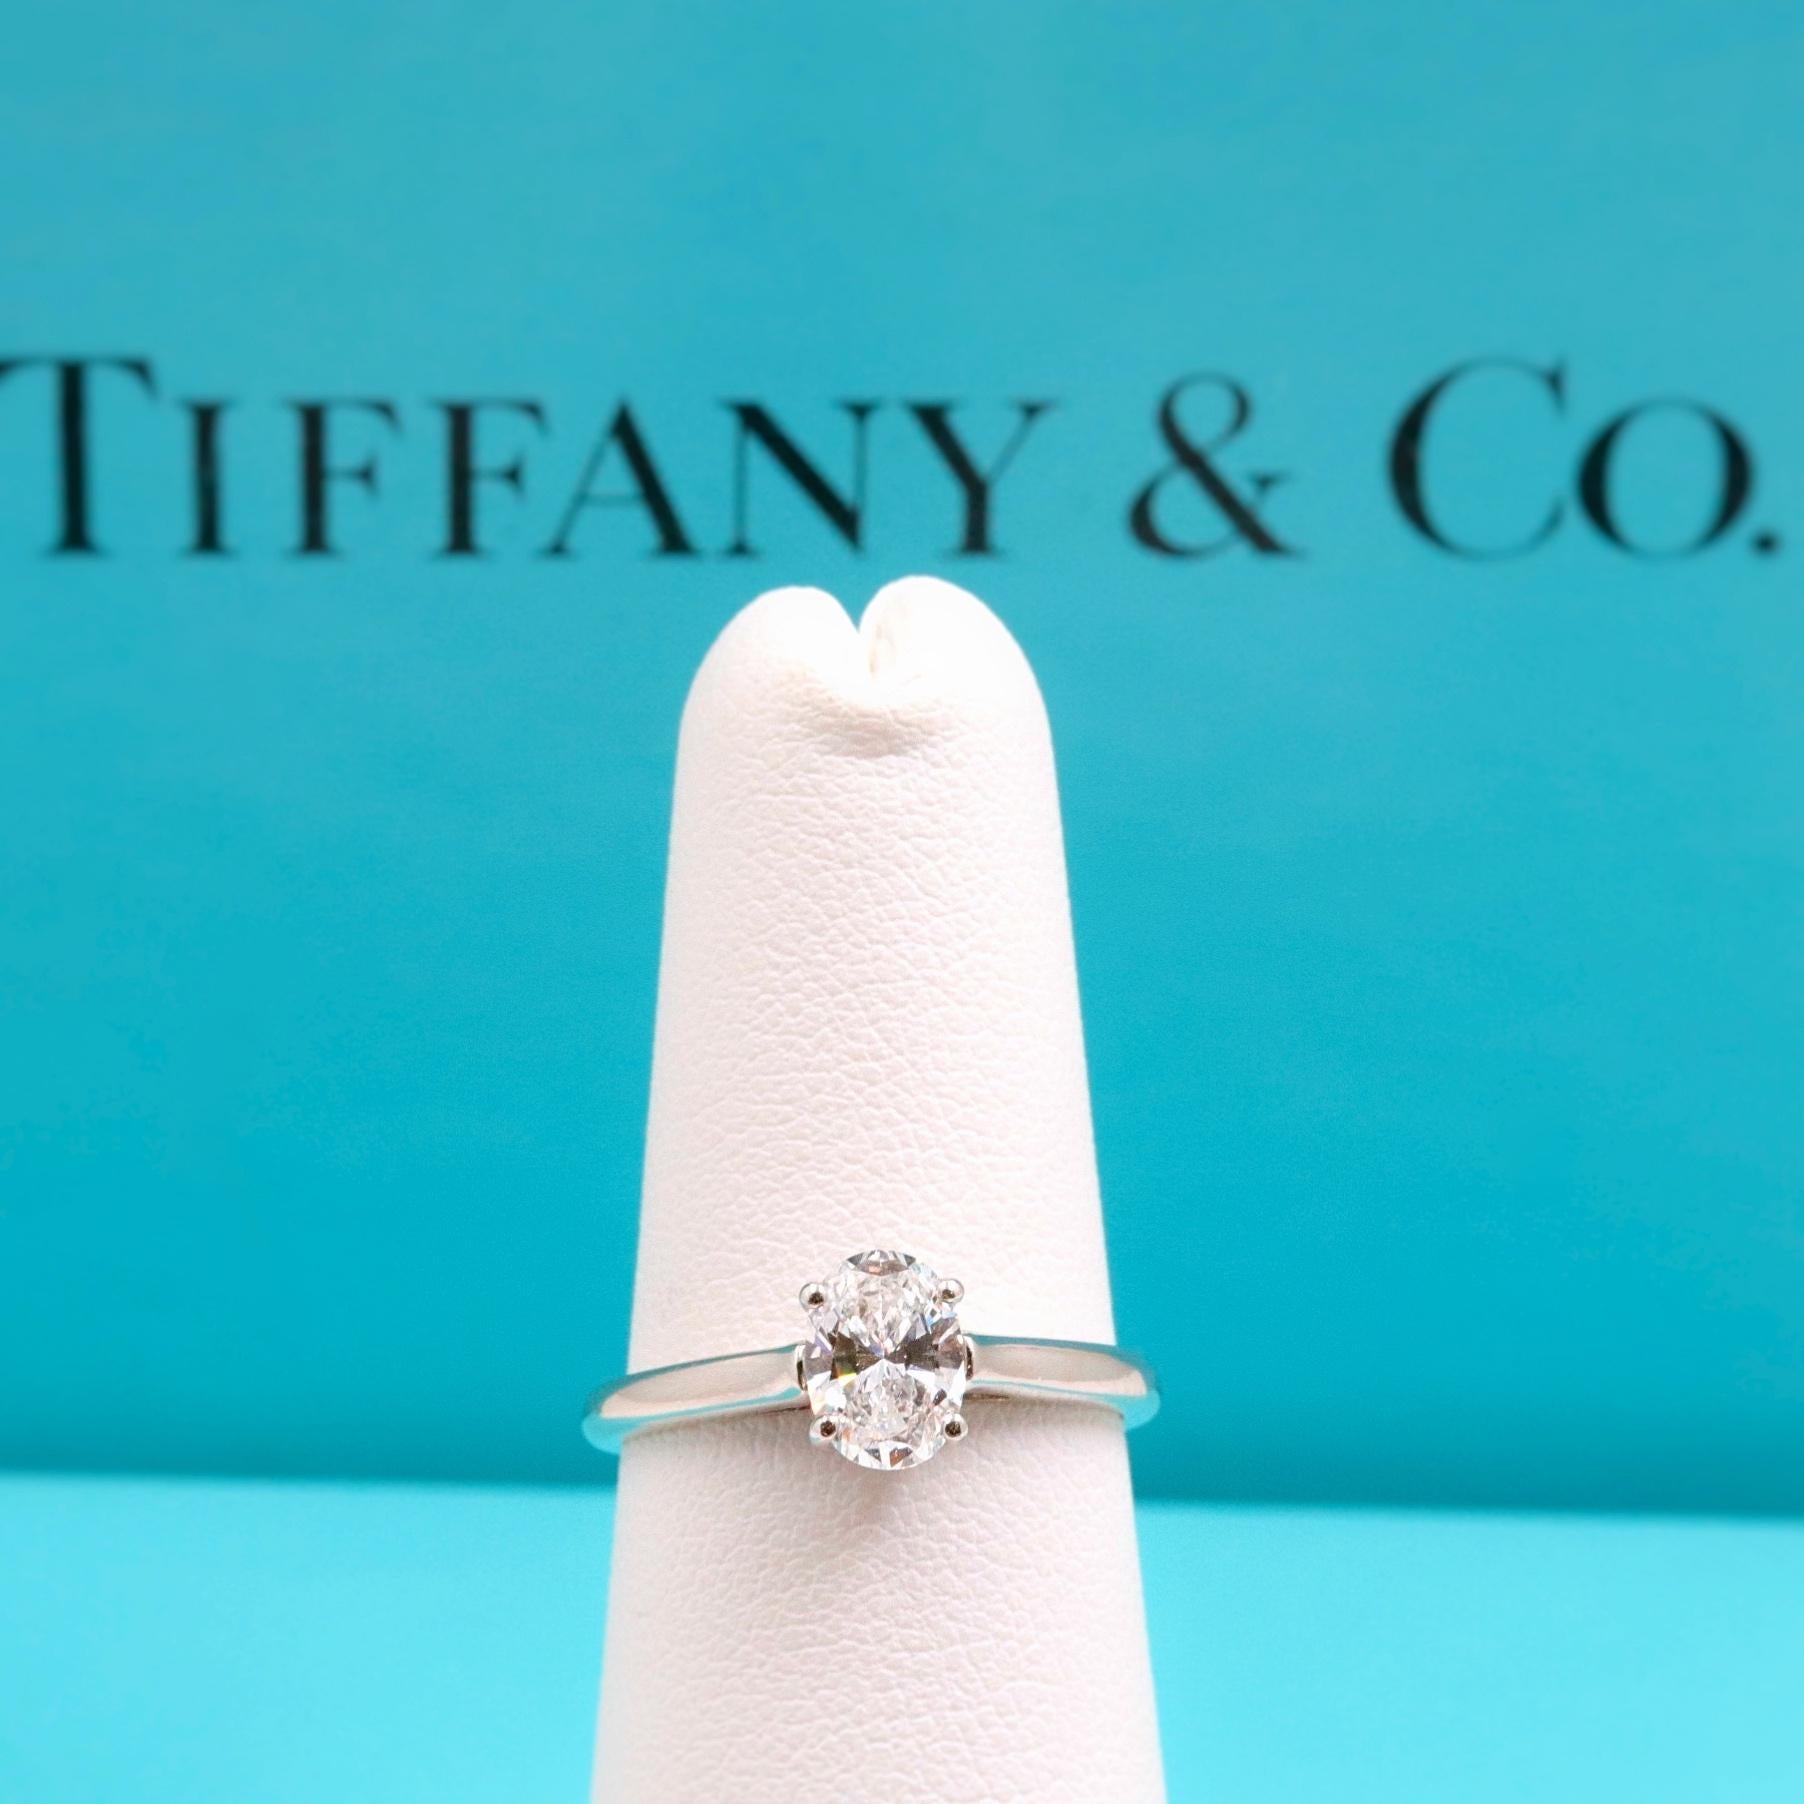 Tiffany & Co.

Style:  Classic Solitaire Engagement Ring
Serial Number: D13083
Metal:  Platinum PT950
Size:  6 - sizable
Total Carat Weight:  0.66 CTS
Diamond Shape:  Oval Shape Brilliant
Diamond Color & Clarity:  E - VVS2
Hallmark:  D13083 .66